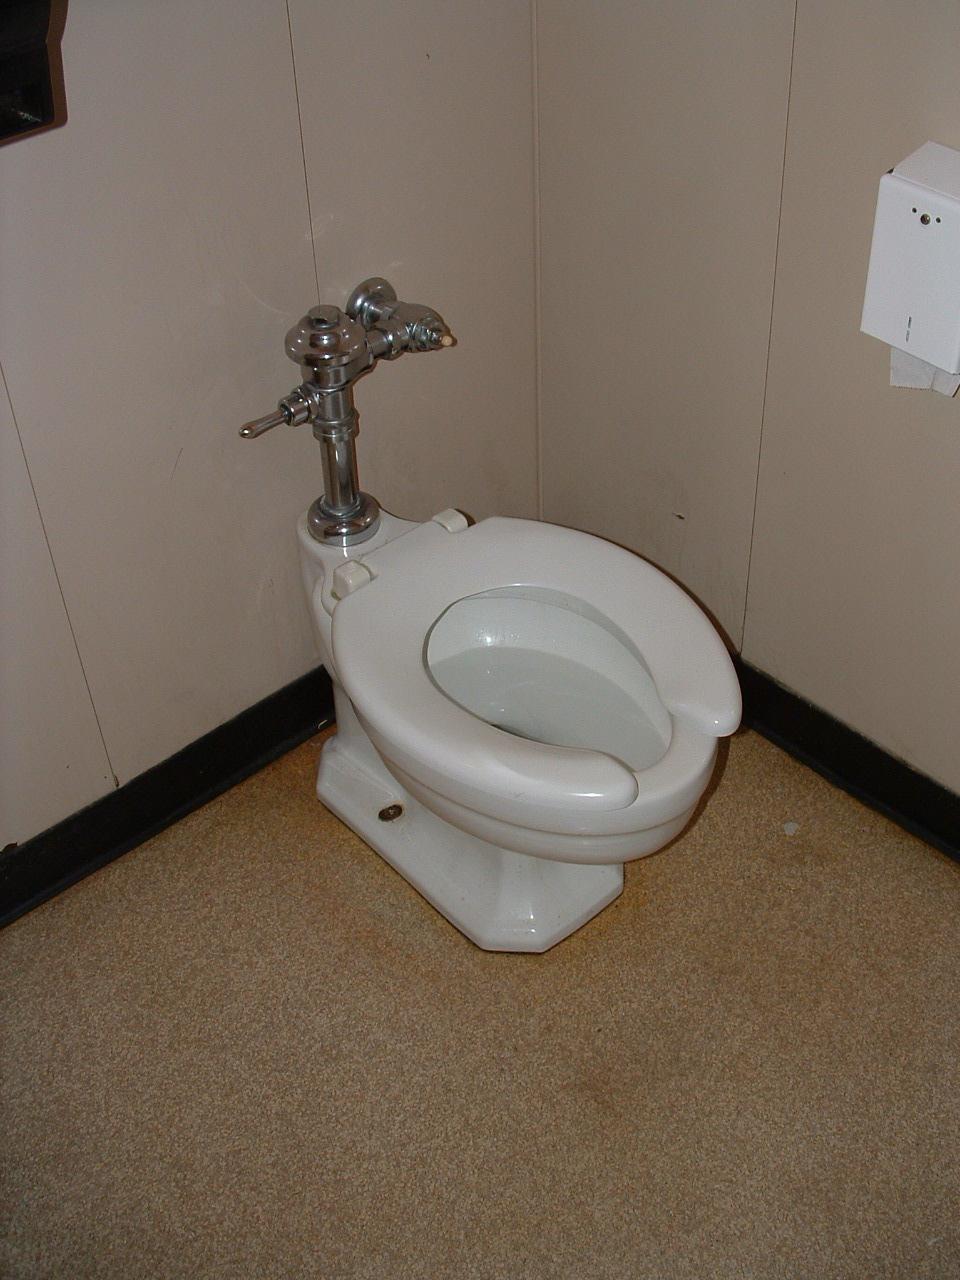 category: RR, C (ADA requirements) Remove (1) floor mounted, flush valve, water closet and (1) wall mounted lavatory.